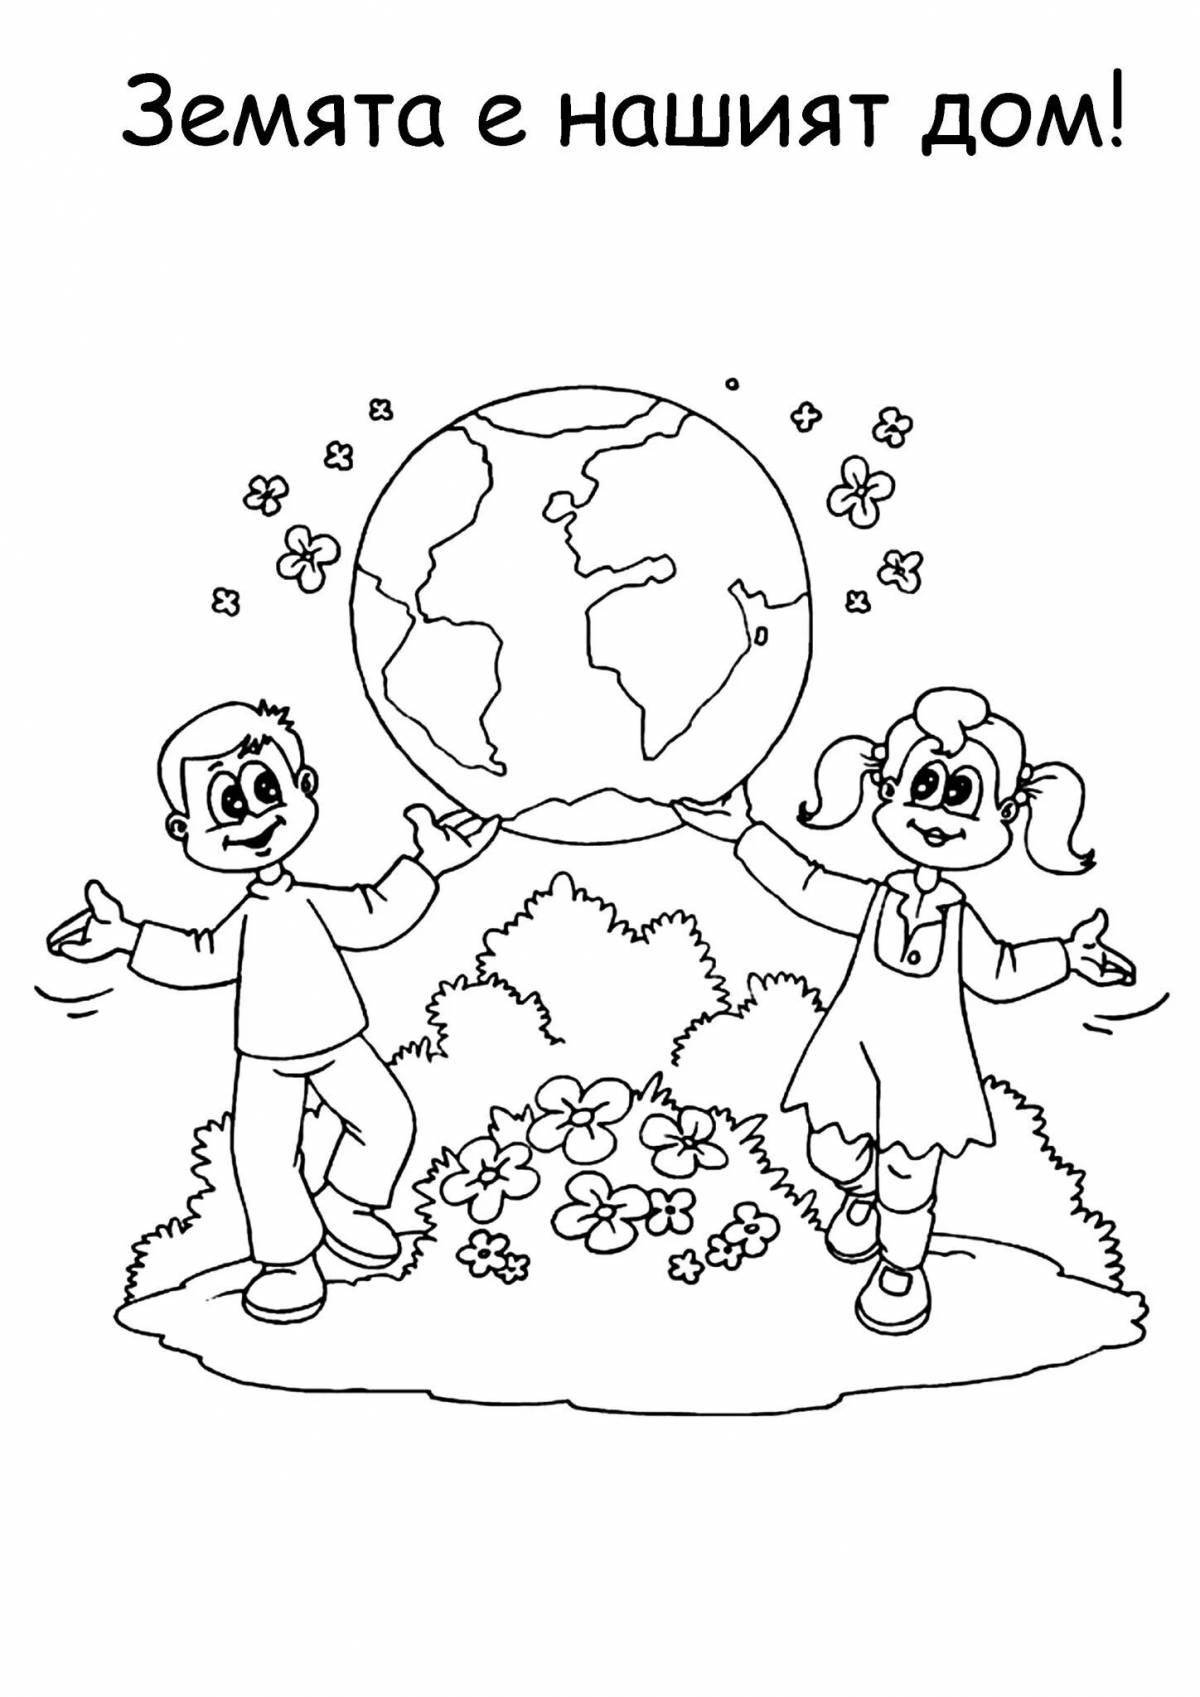 Encouraged save nature coloring page